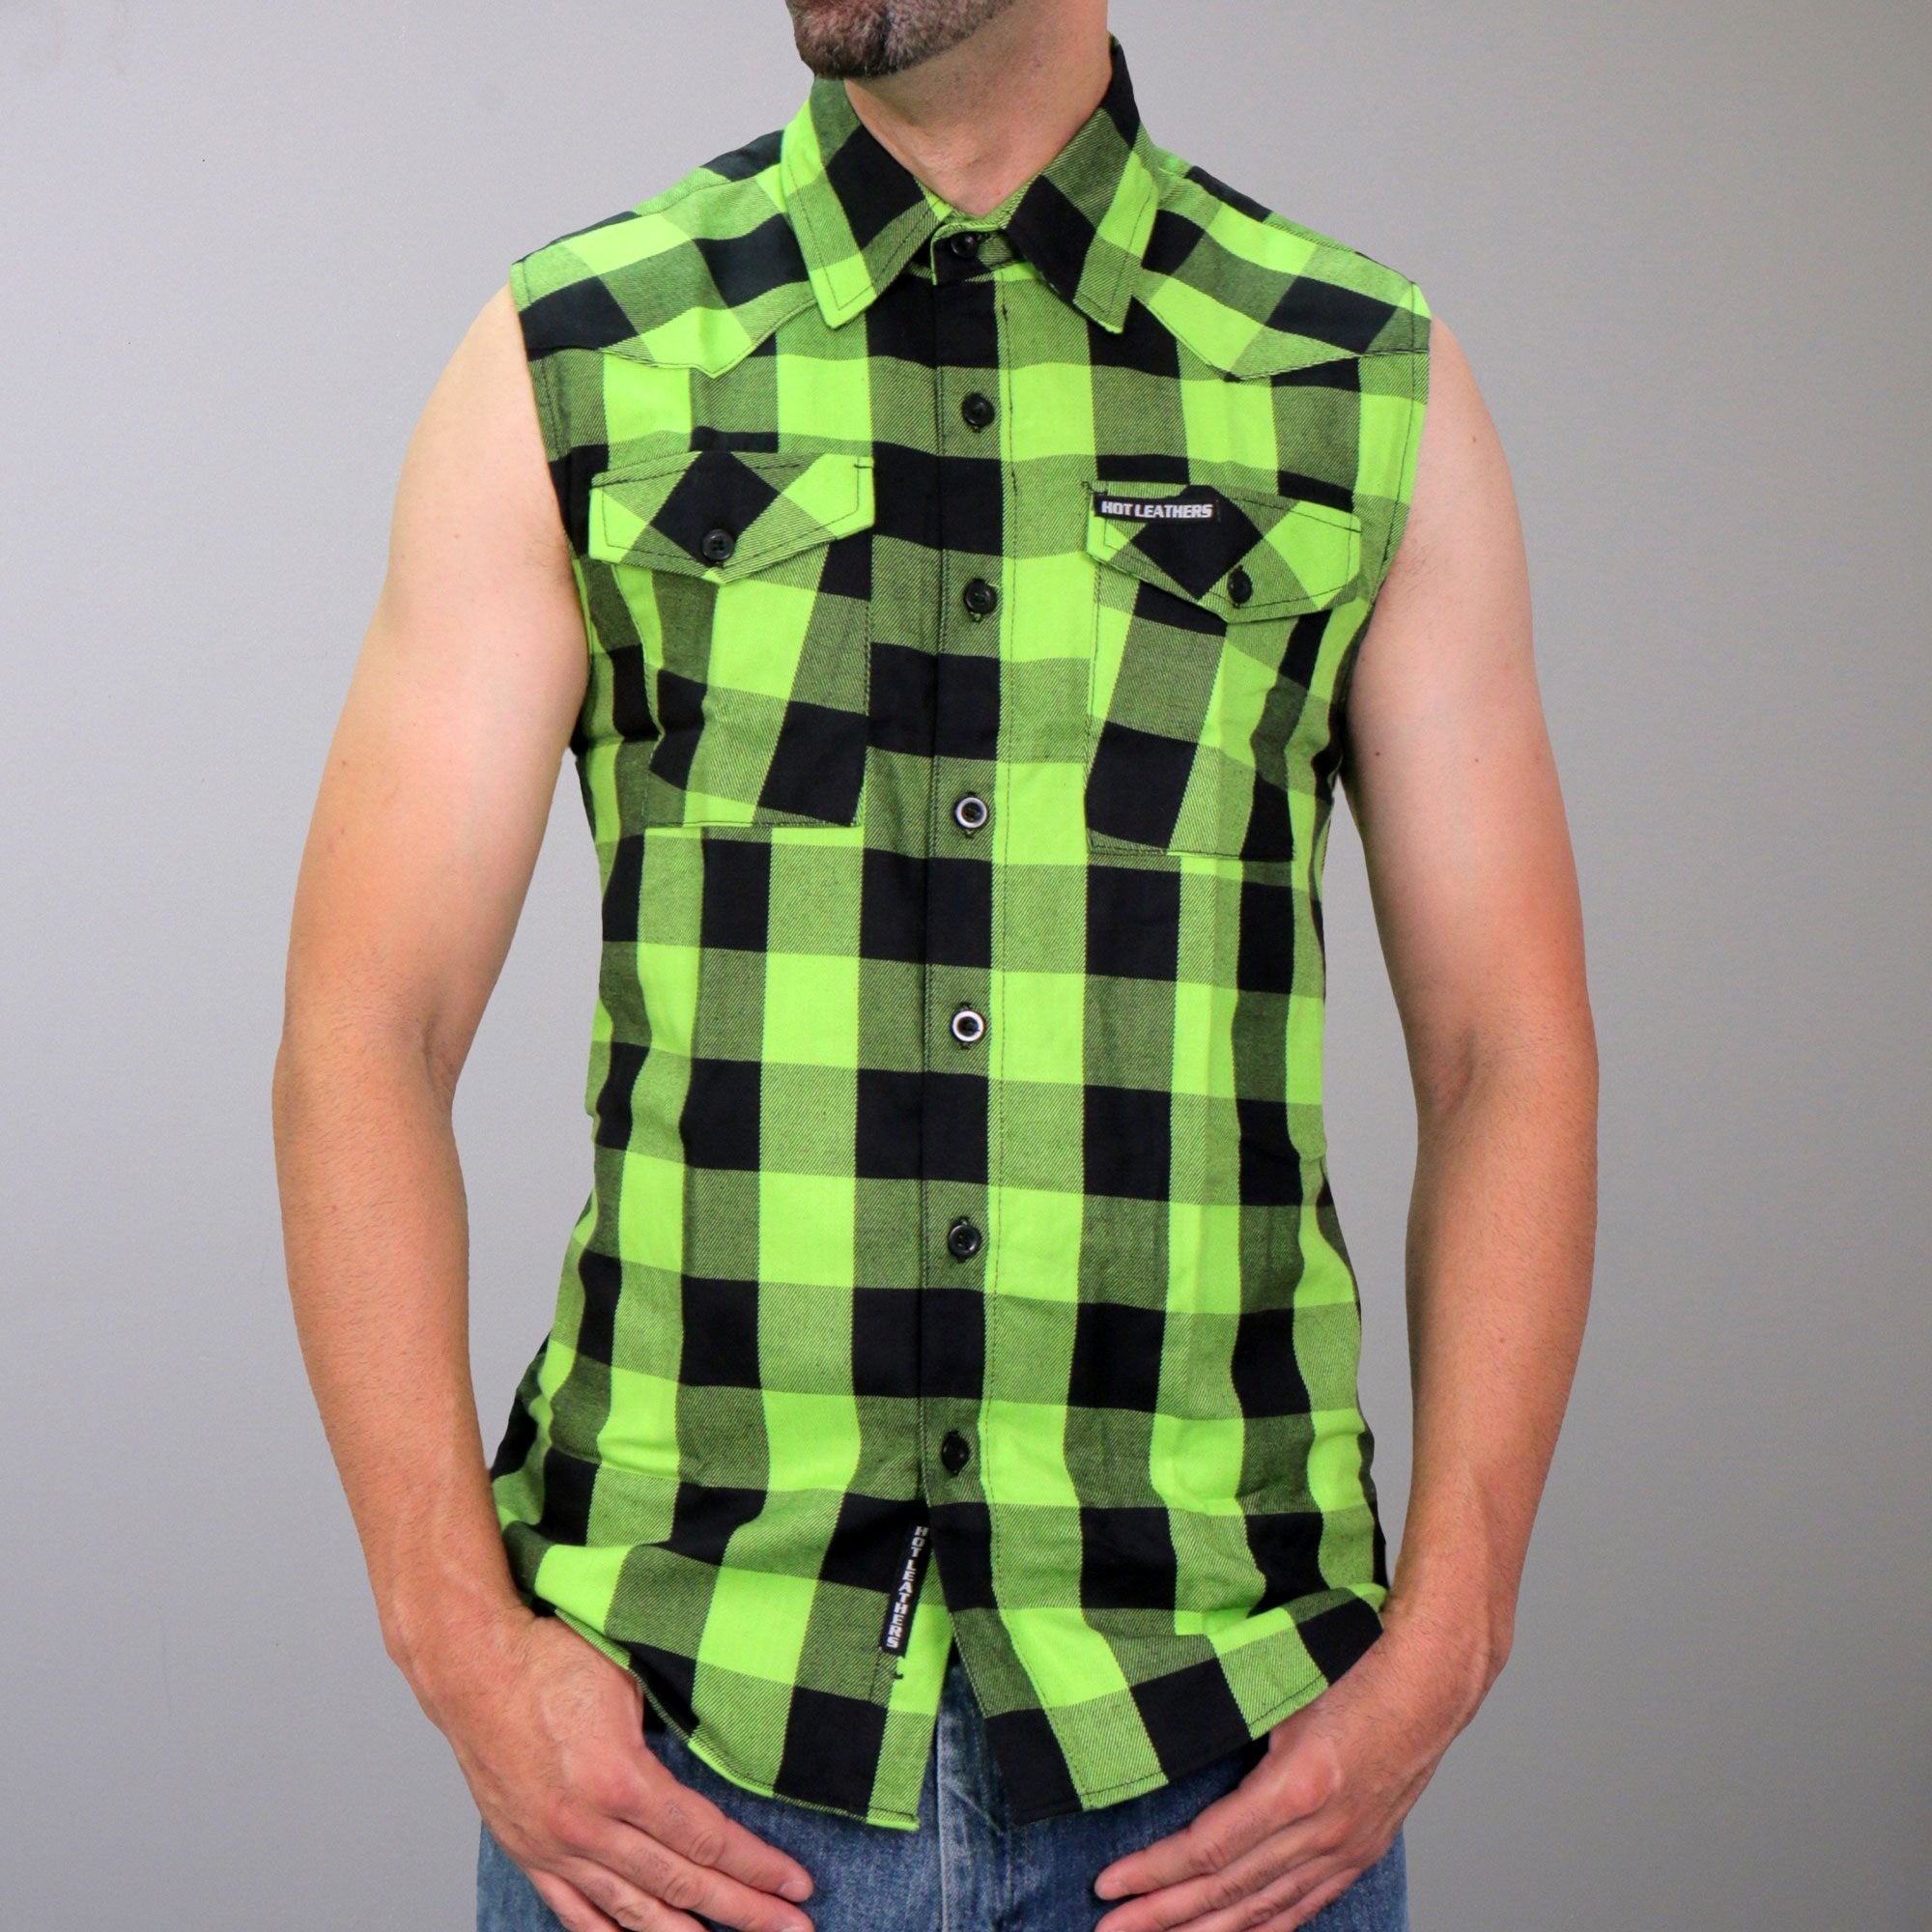 Hot Leathers FLM5002 Men’s Black and Green Sleeveless Cotton Flannel Shirt